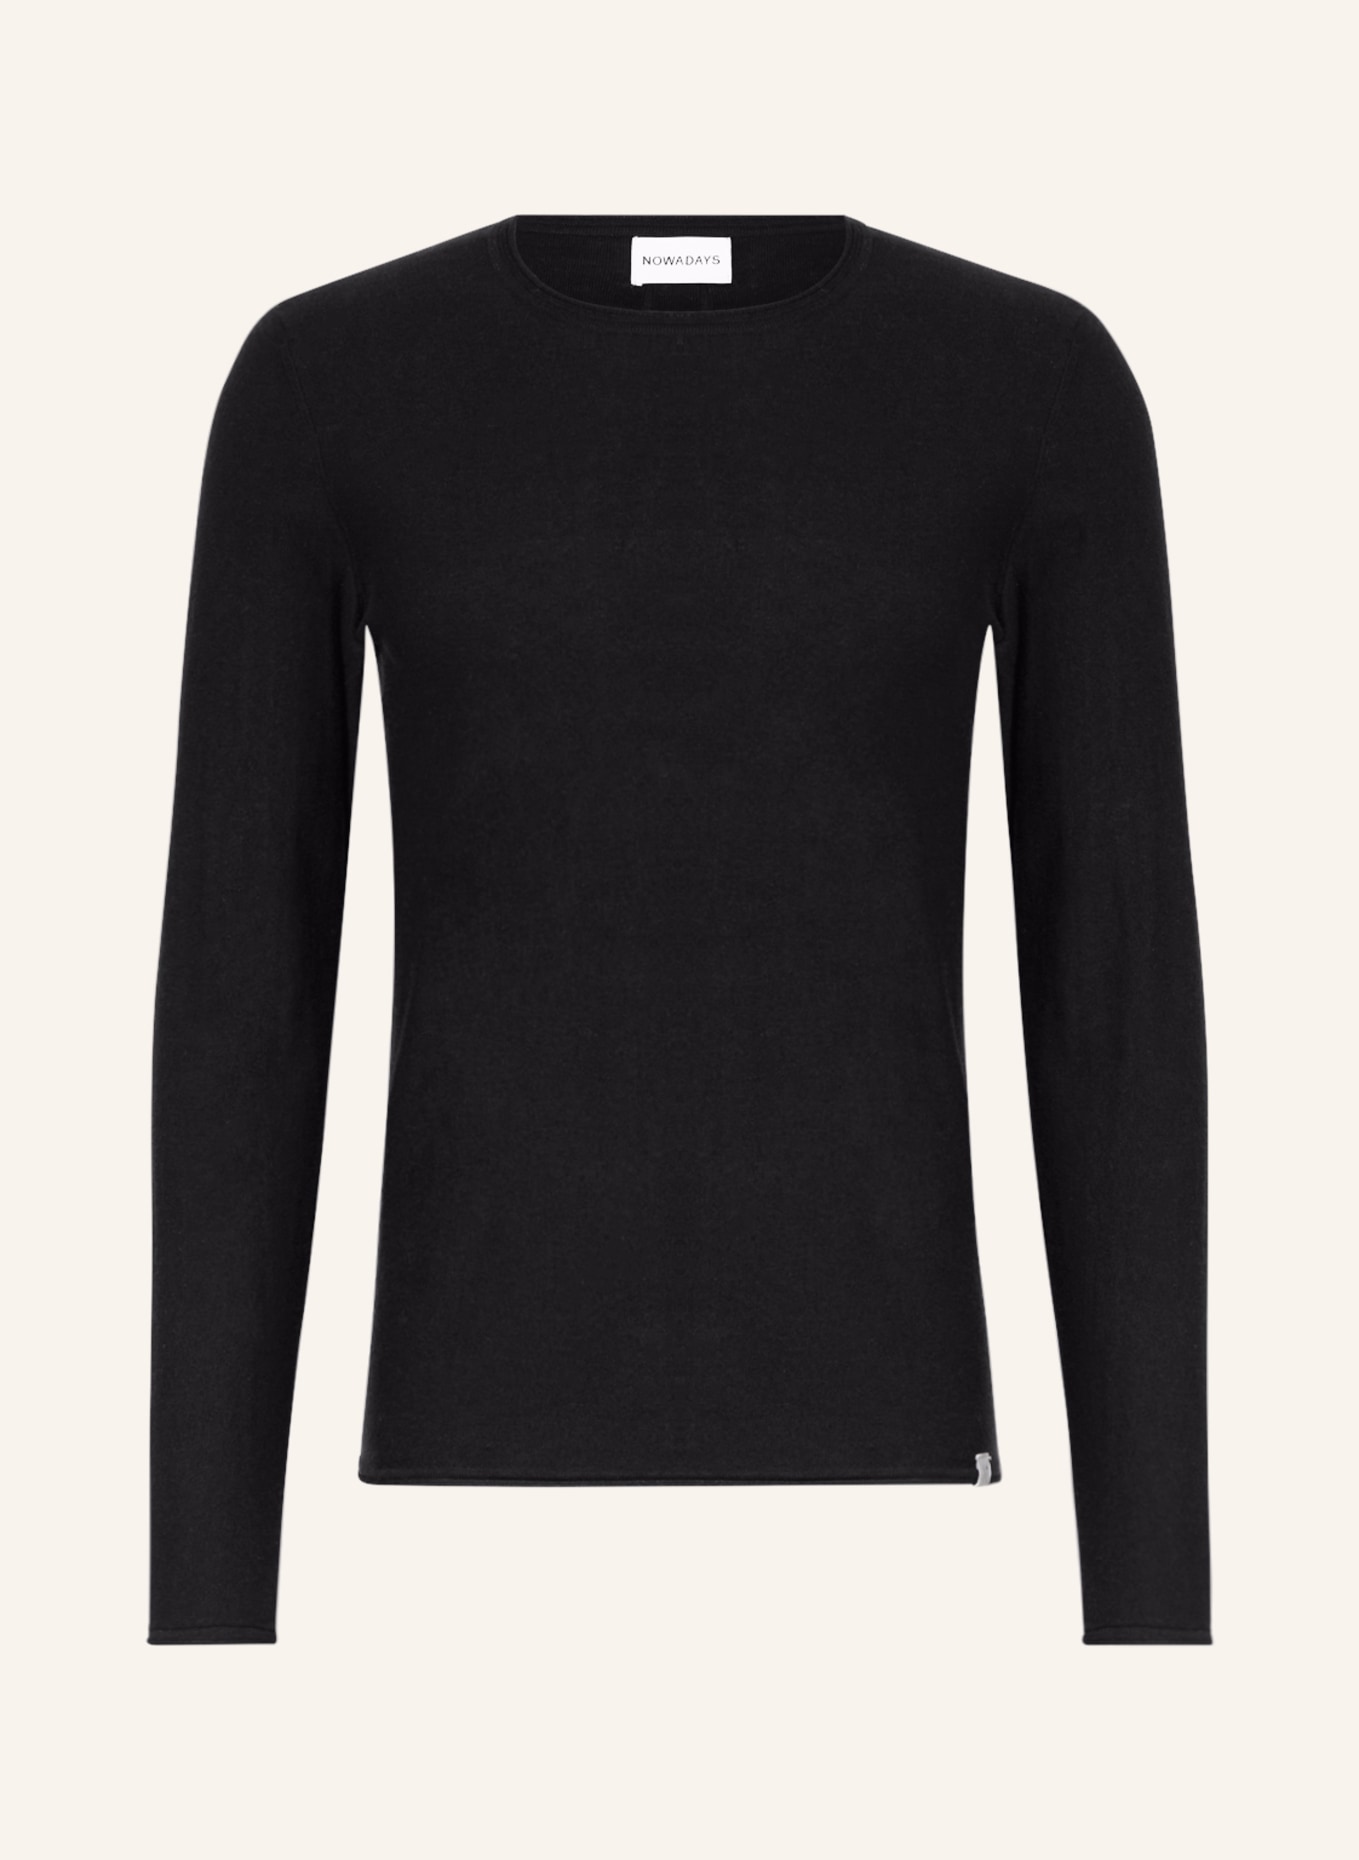 NOWADAYS Sweater, Color: BLACK (Image 1)